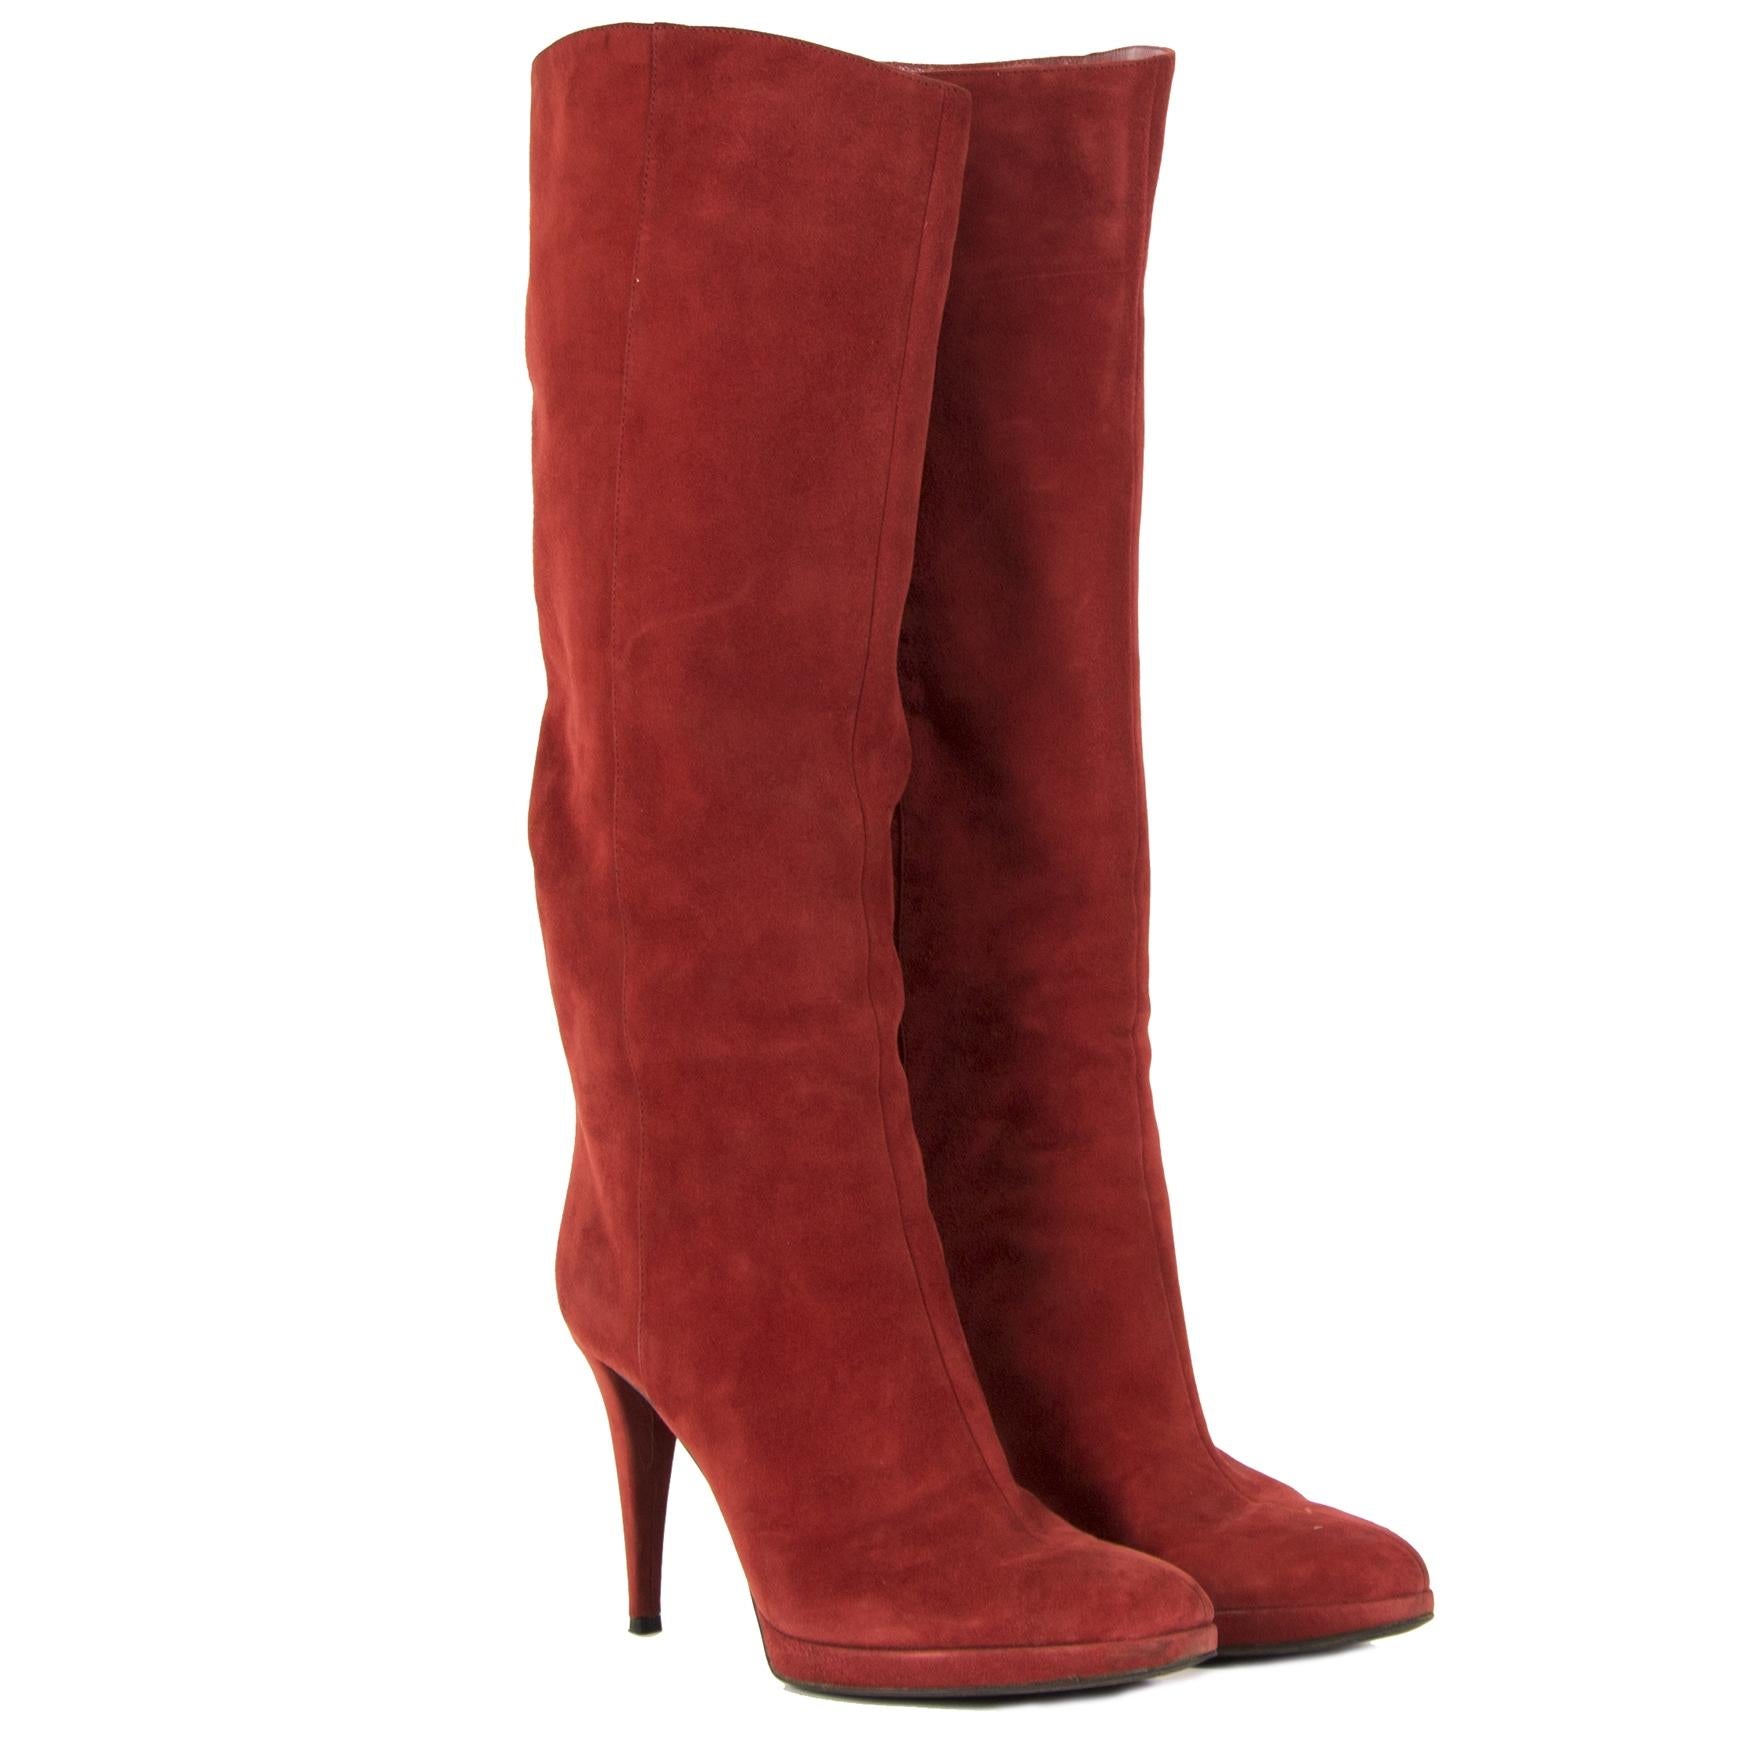 Good preloved condition

Sergio Rossi Red Suede High Boots - Size 41

These high boots comes in red suede and can be the perfect accent to your outfit!
The high heel gives extra elegancy and the small platform makes it more comfortable to